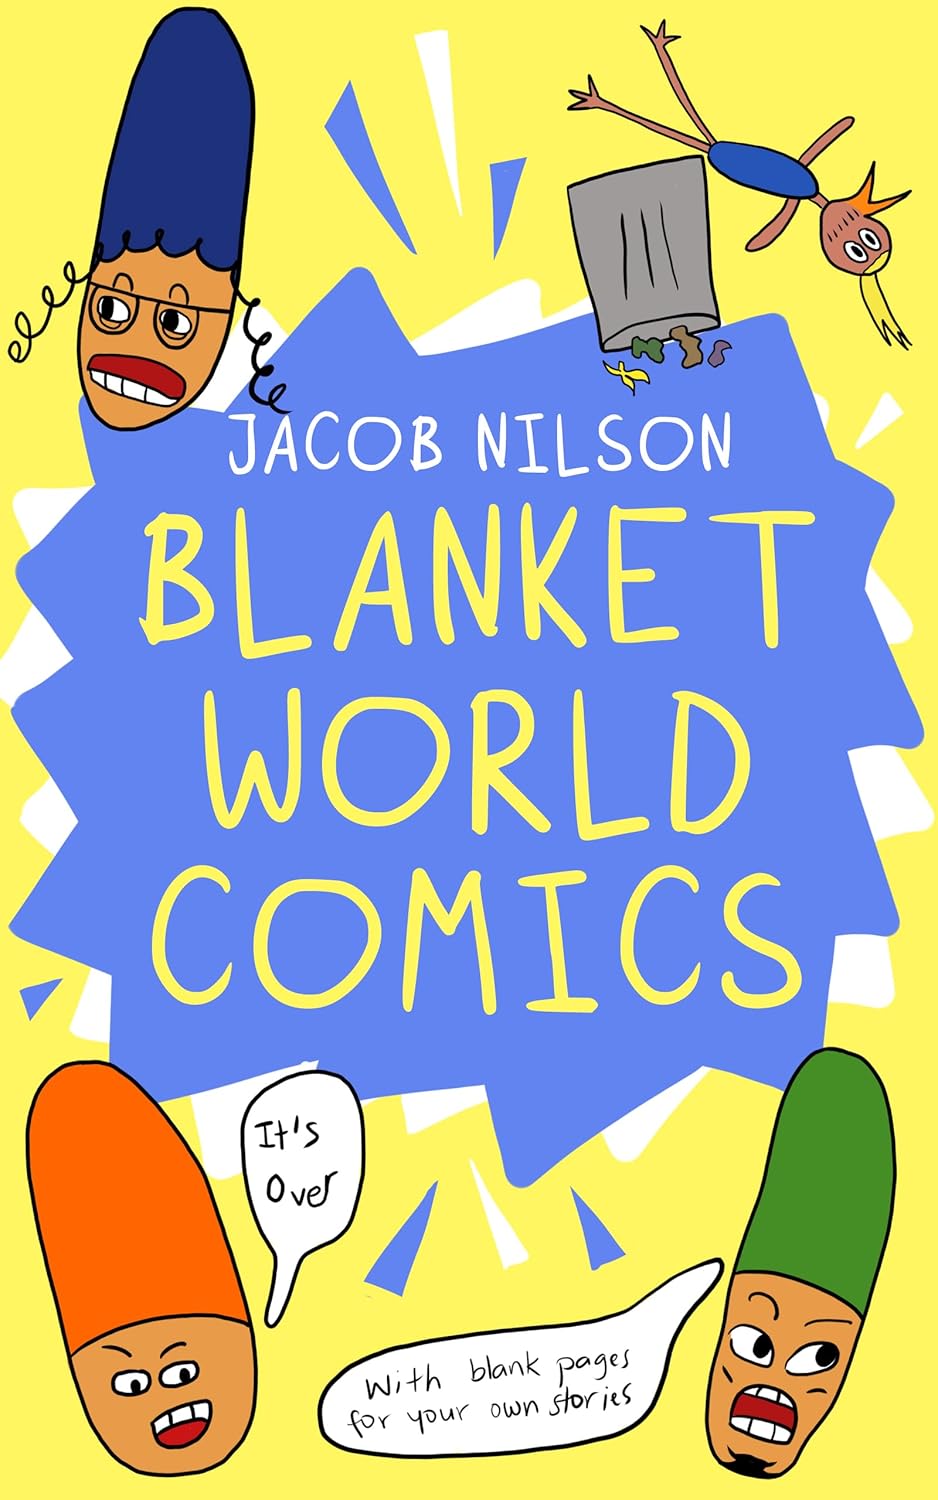 New book "Blanketworld Comics" by Jacob Nilson is released, a collection of comic-style stories that provides laughs and creative prompts for young readers